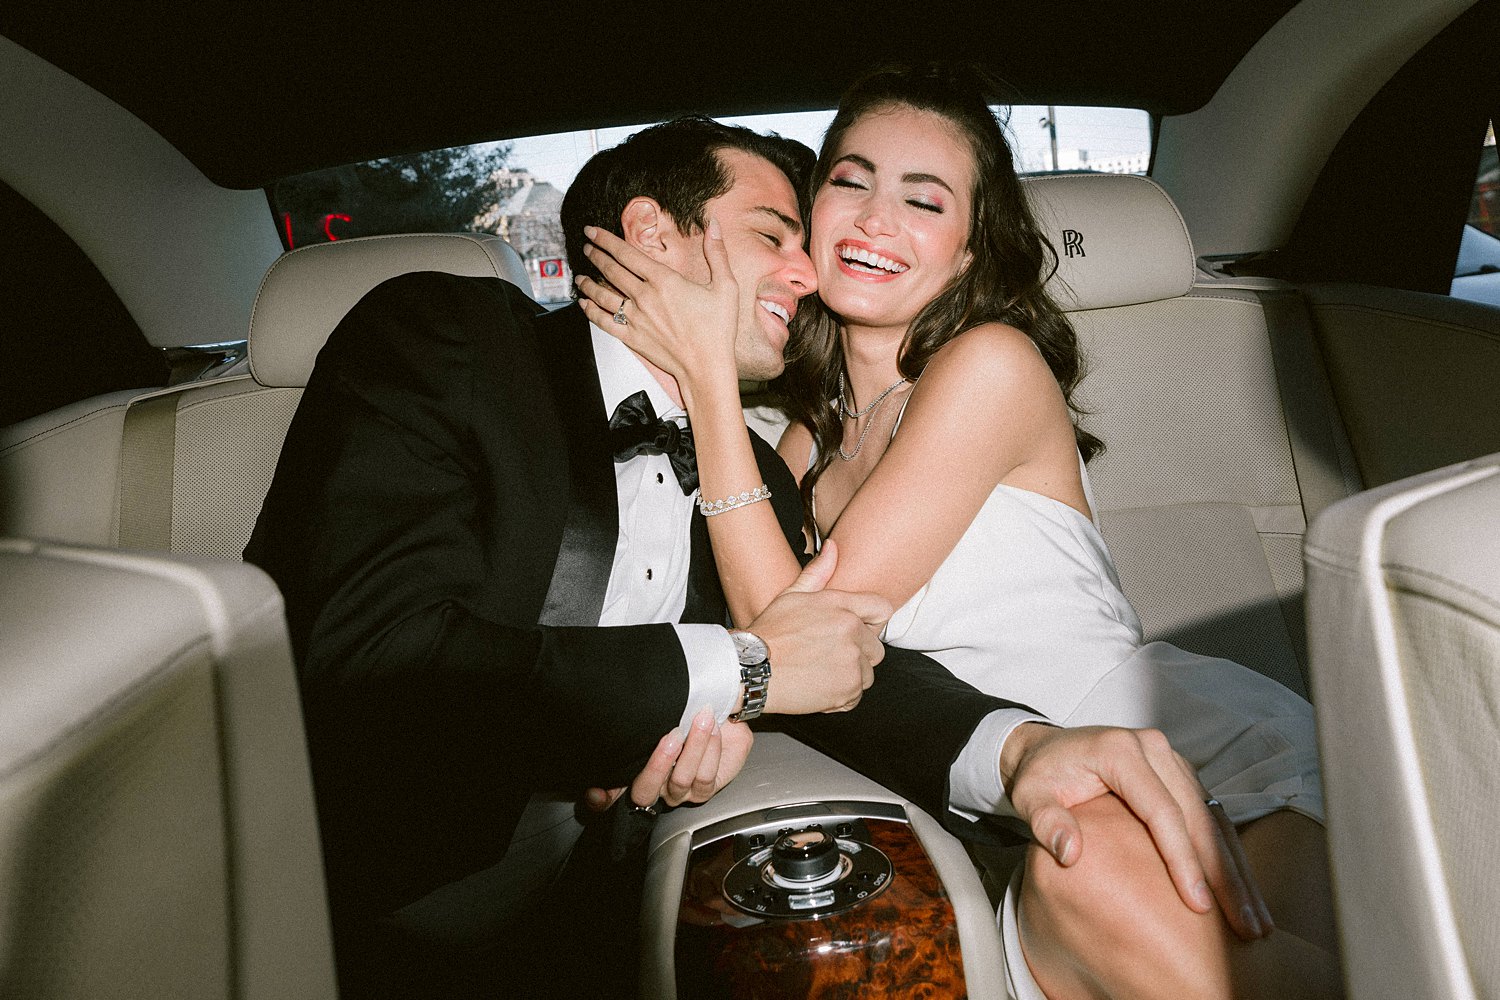 man in black tuxedo with woman in white dress sitting in car laughing